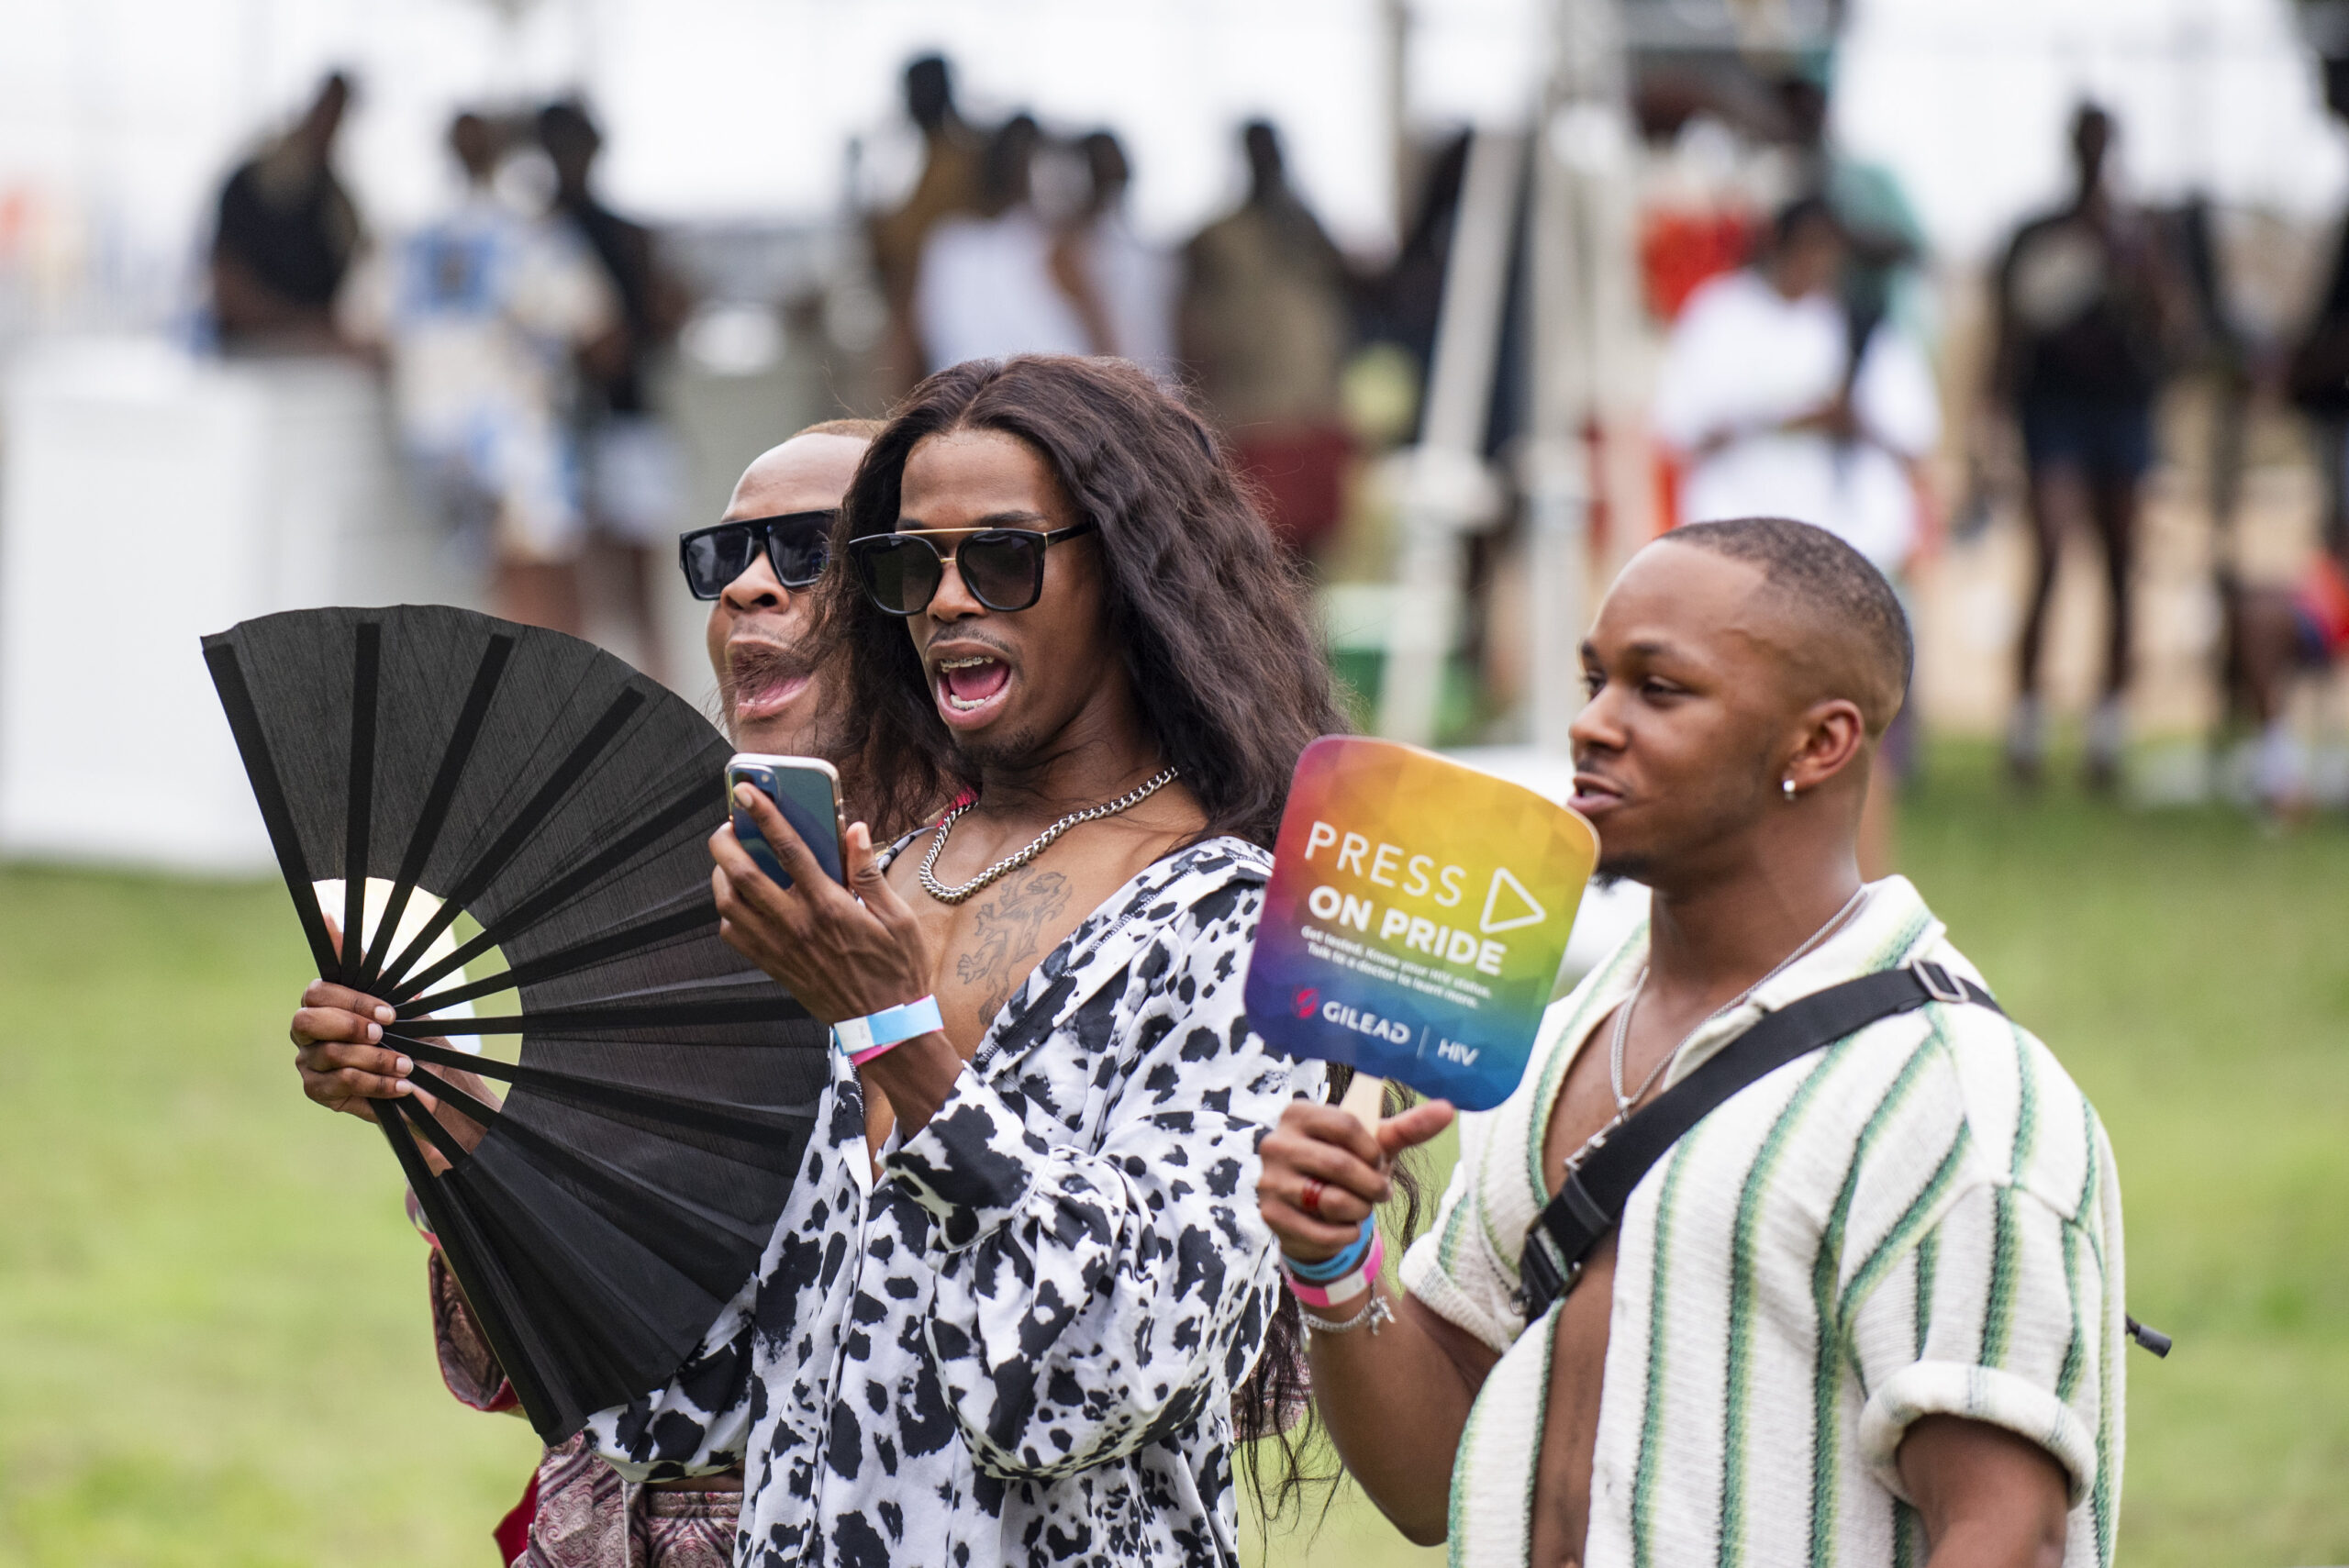 Attendees watch Leslie Carter perform during the Dallas Southern Pride Juneteenth Unity Weekend Cel...